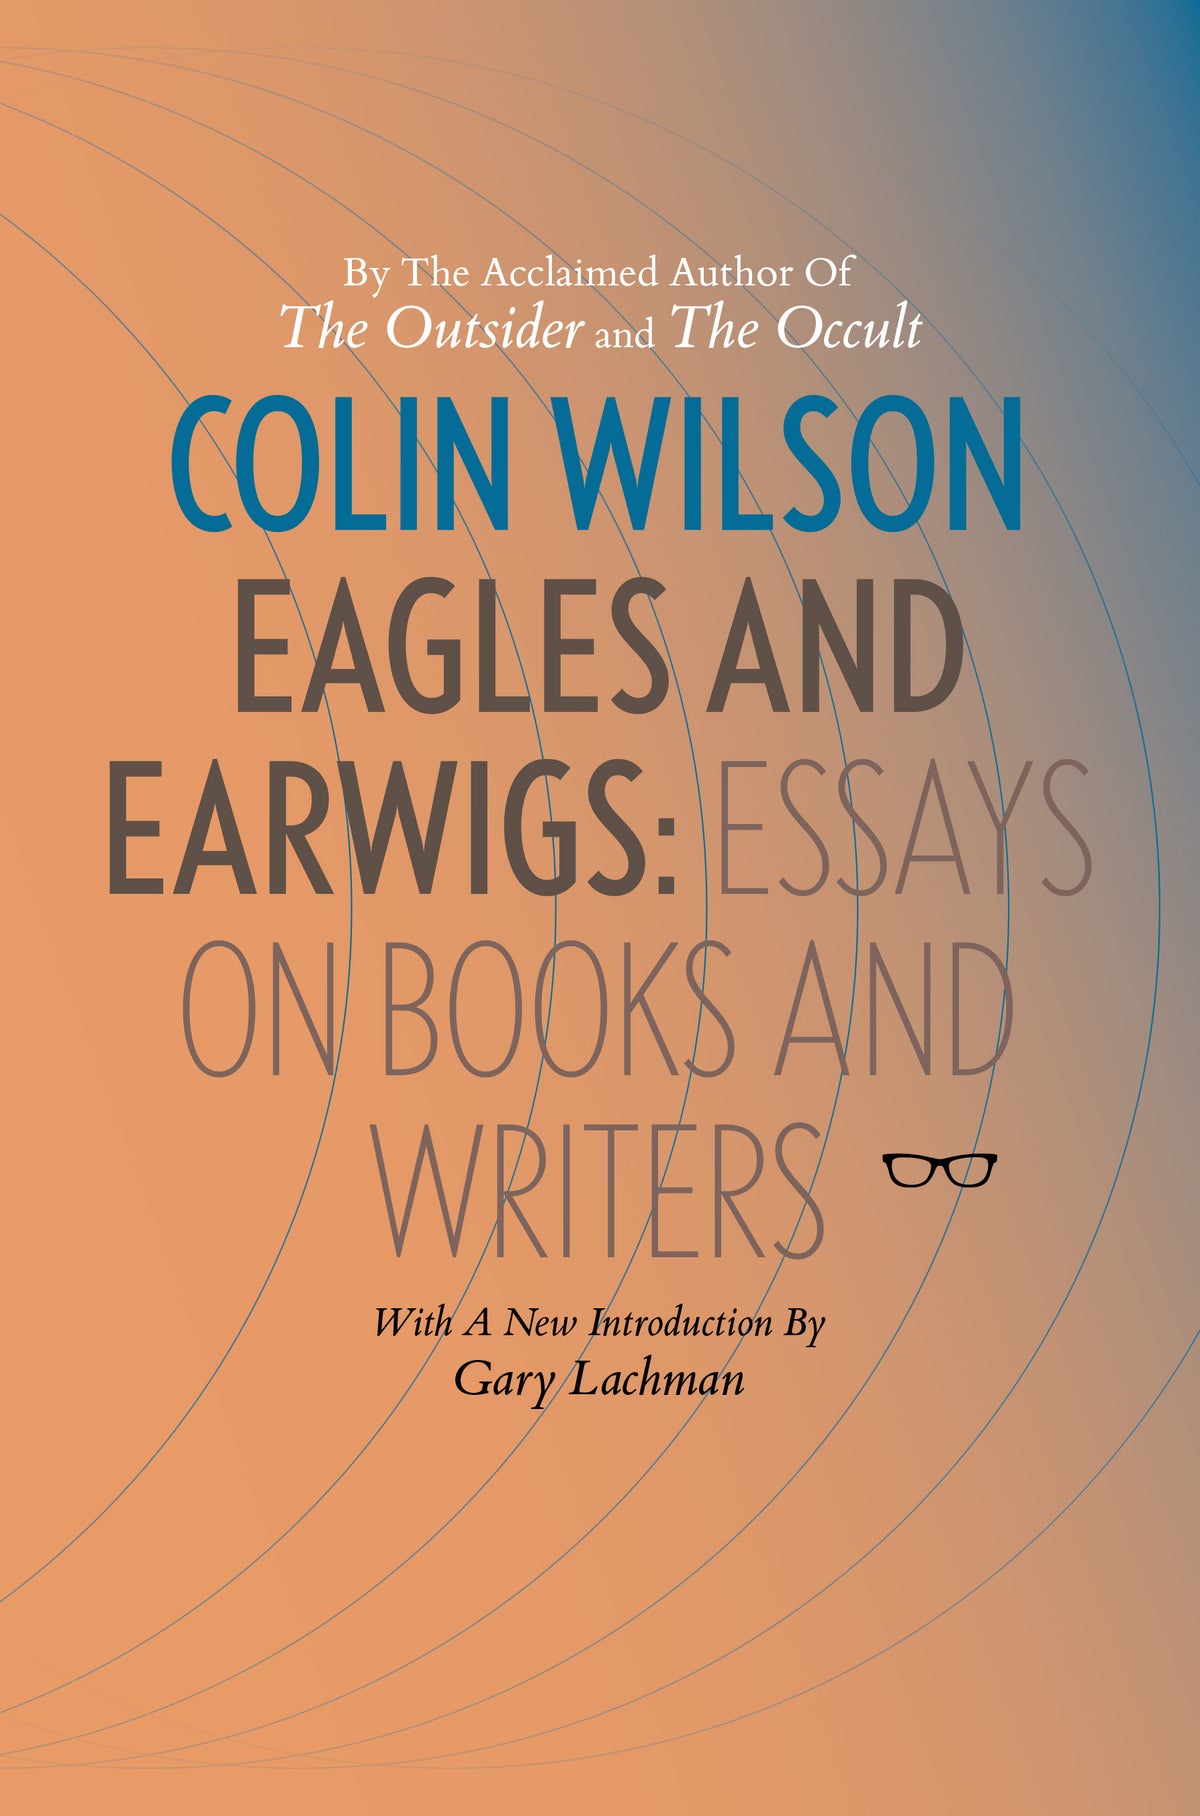 COLIN WILSON&#39;S Eagles and Earwigs - Essays on Books and Writers